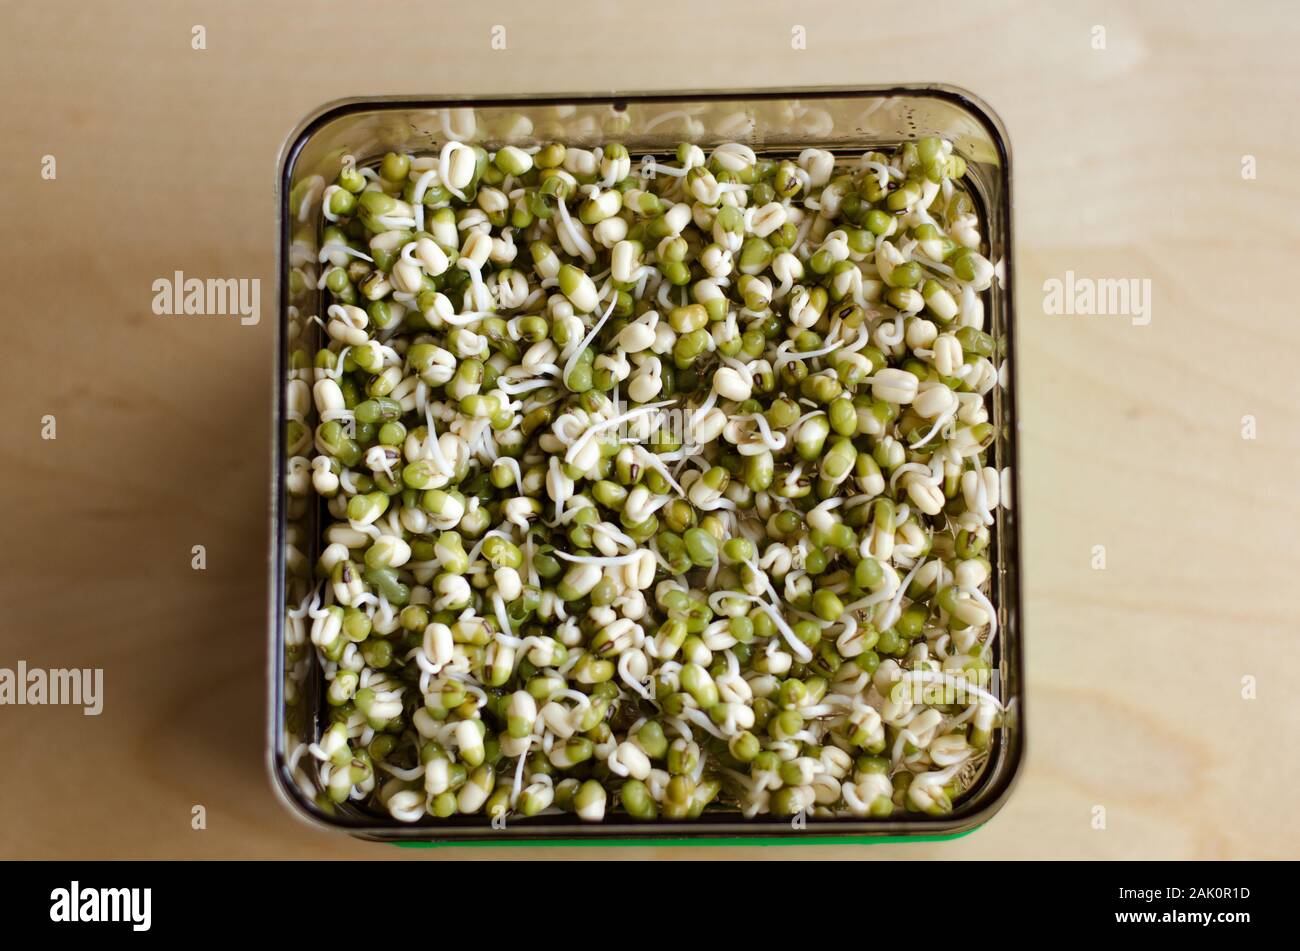 Making of mungbean sprouts on a tray on a wooden table. Unfocused background. Day 2 Stock Photo